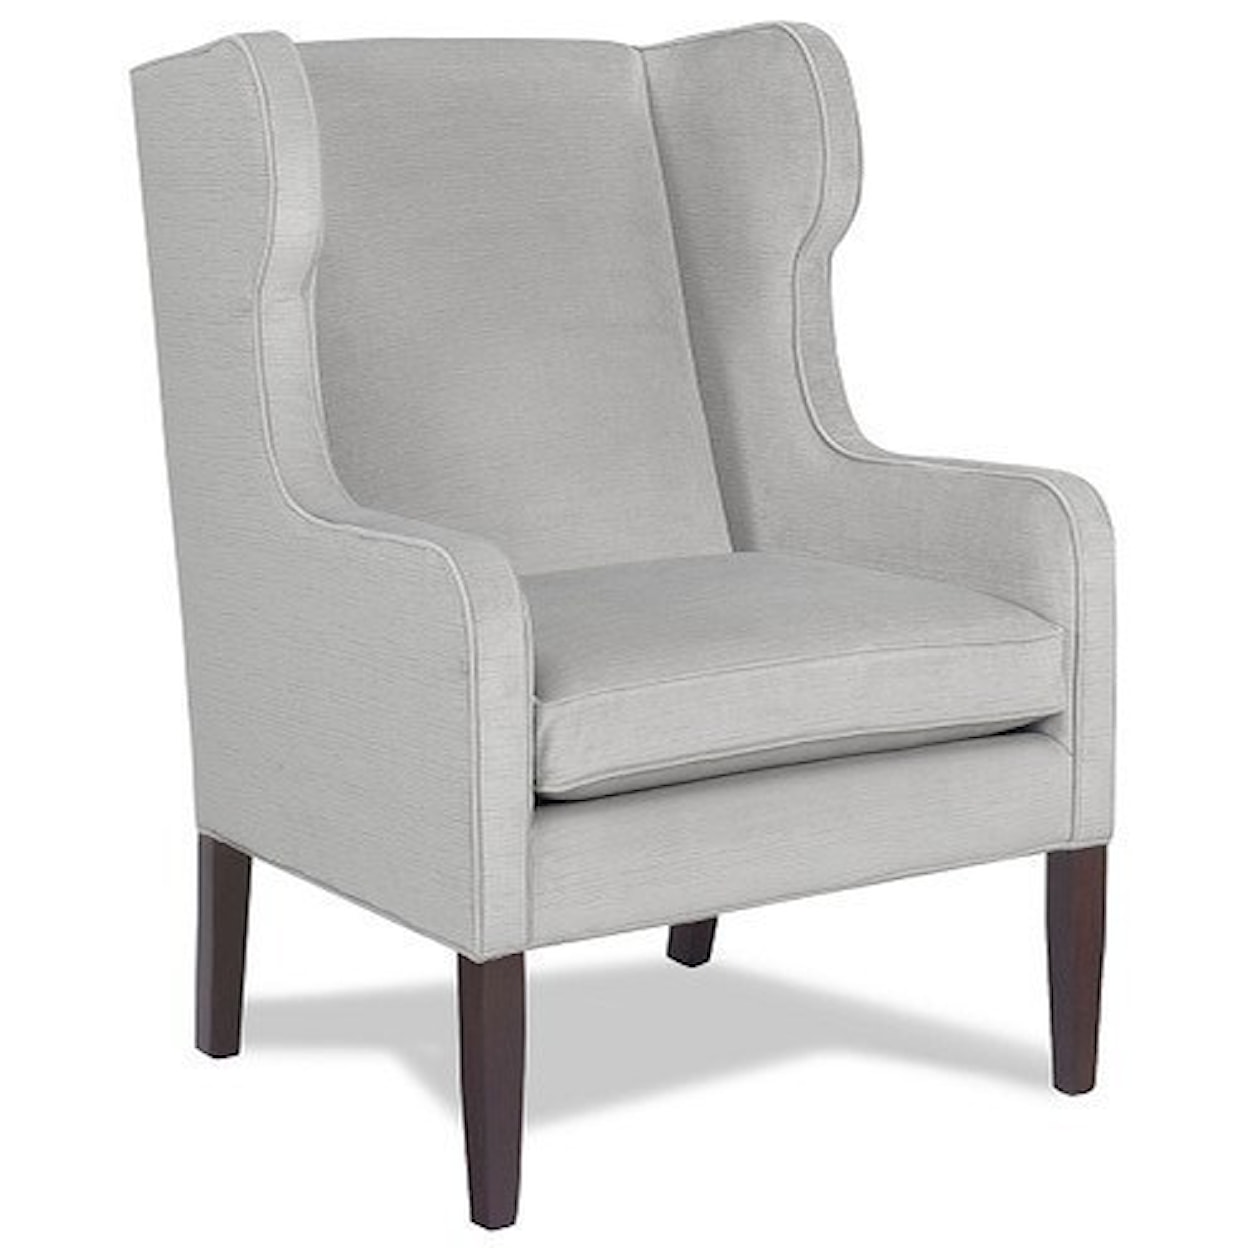 Temple Furniture Mallory  Chair